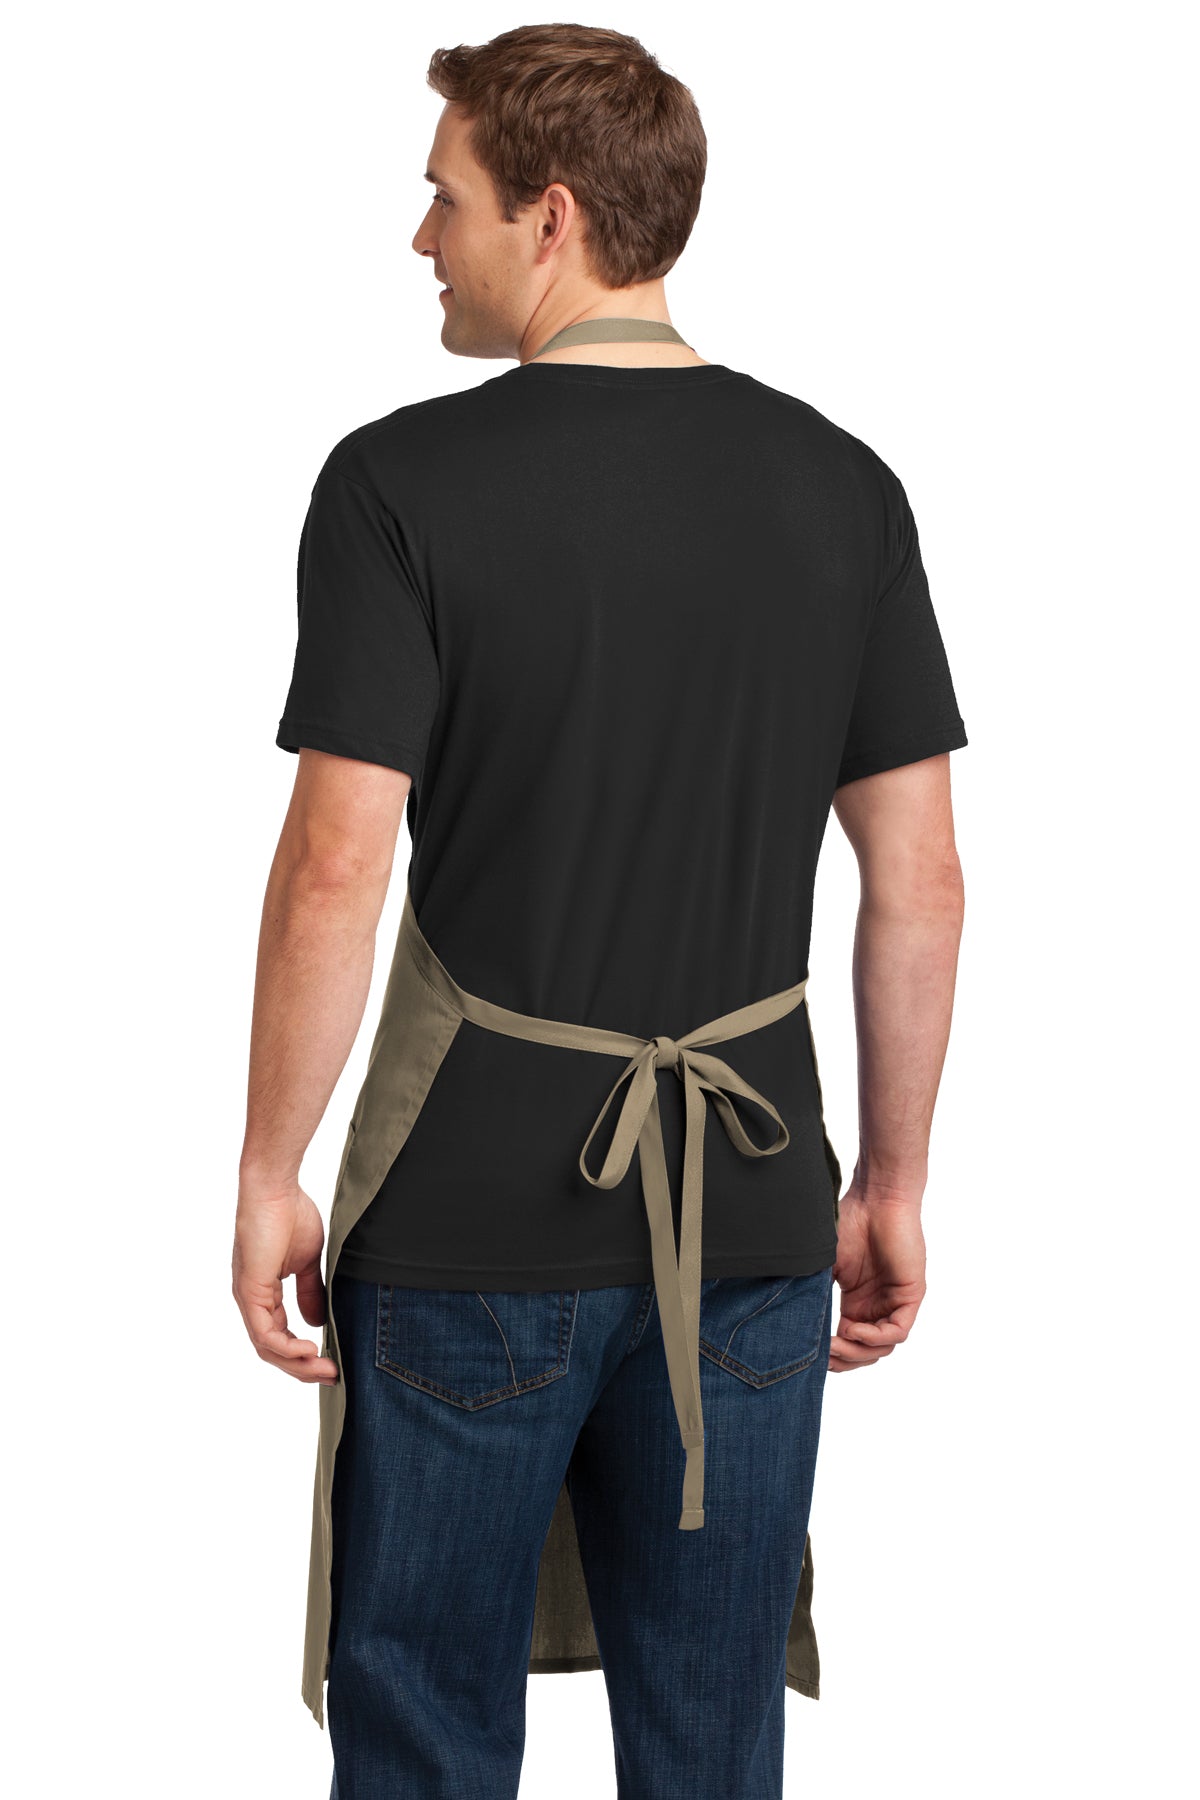 Port Authority Easy Care Customized Extra Long Bib Aprons with Stain Release, Khaki